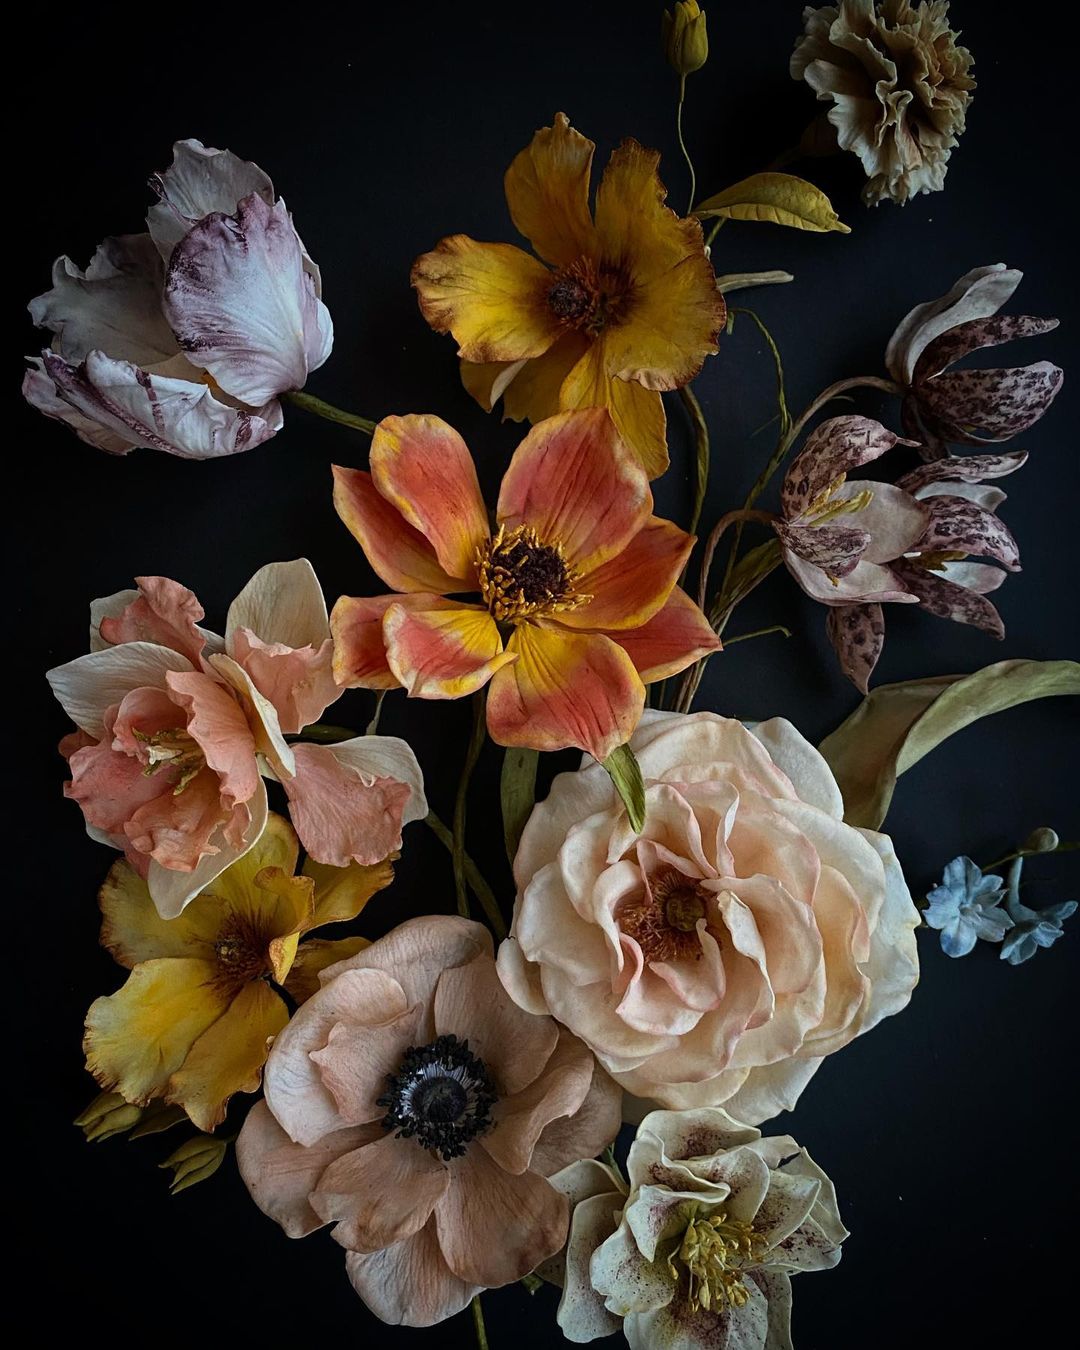 The Edible Art From Cake Atelier Amsterdam Sugar Flowers